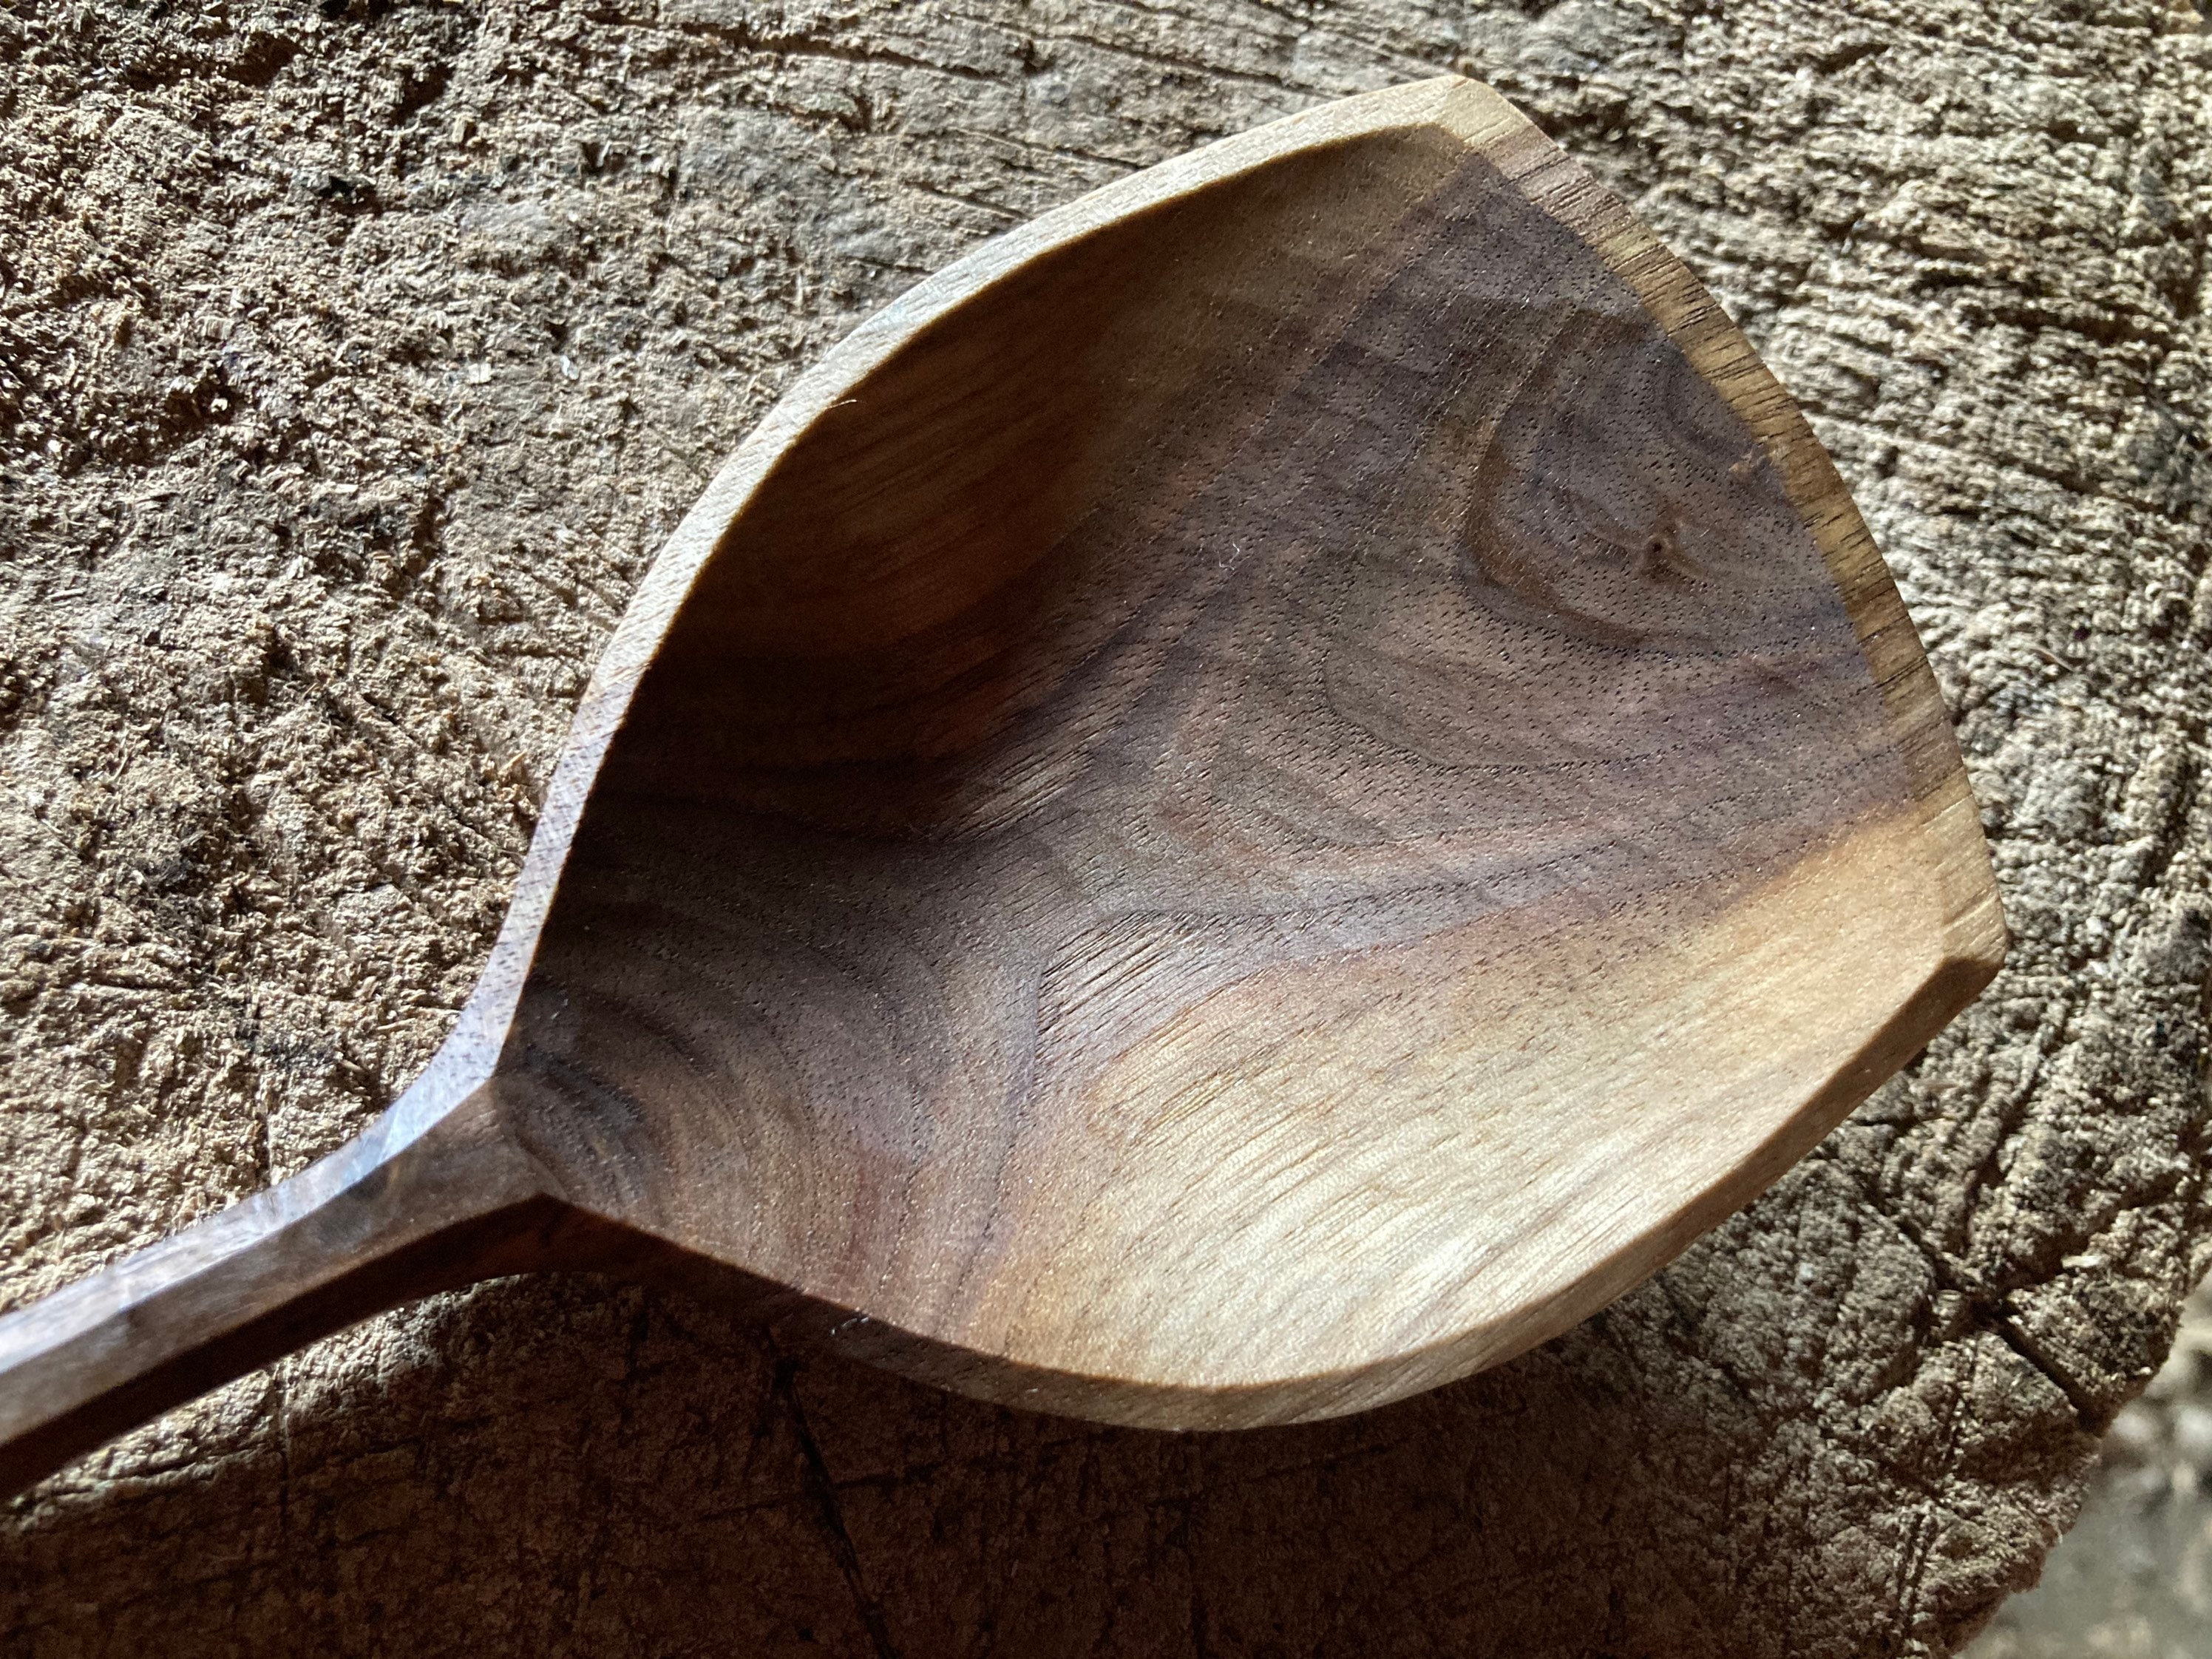 10” wooden ladle, serving ladle, wooden spoon, hand carved wooden spoon